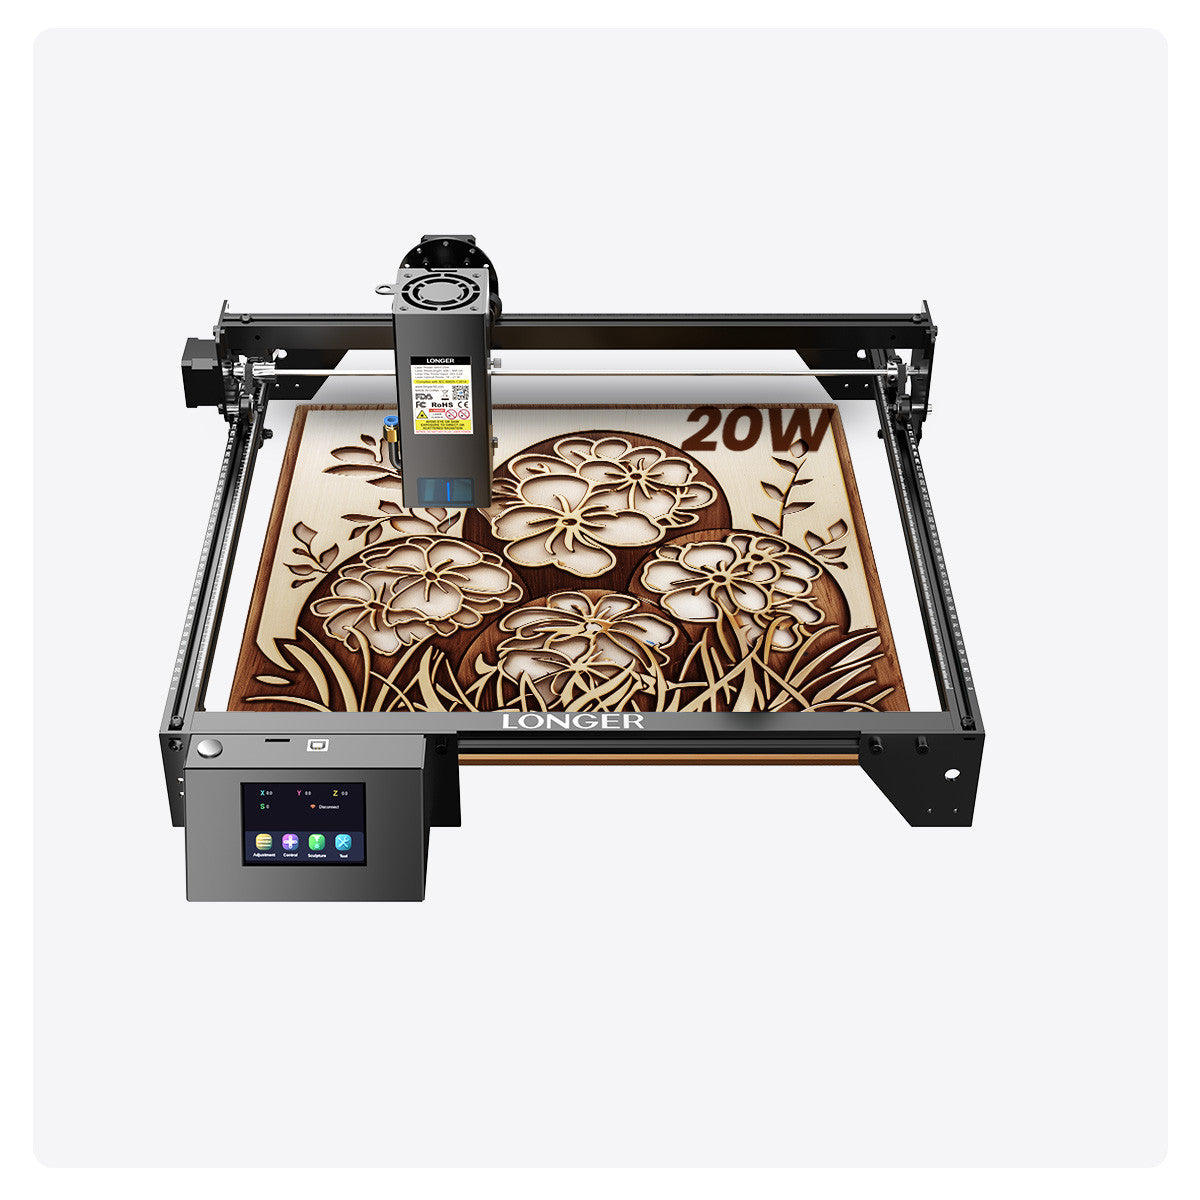 RAY5 20W Laser Engraver